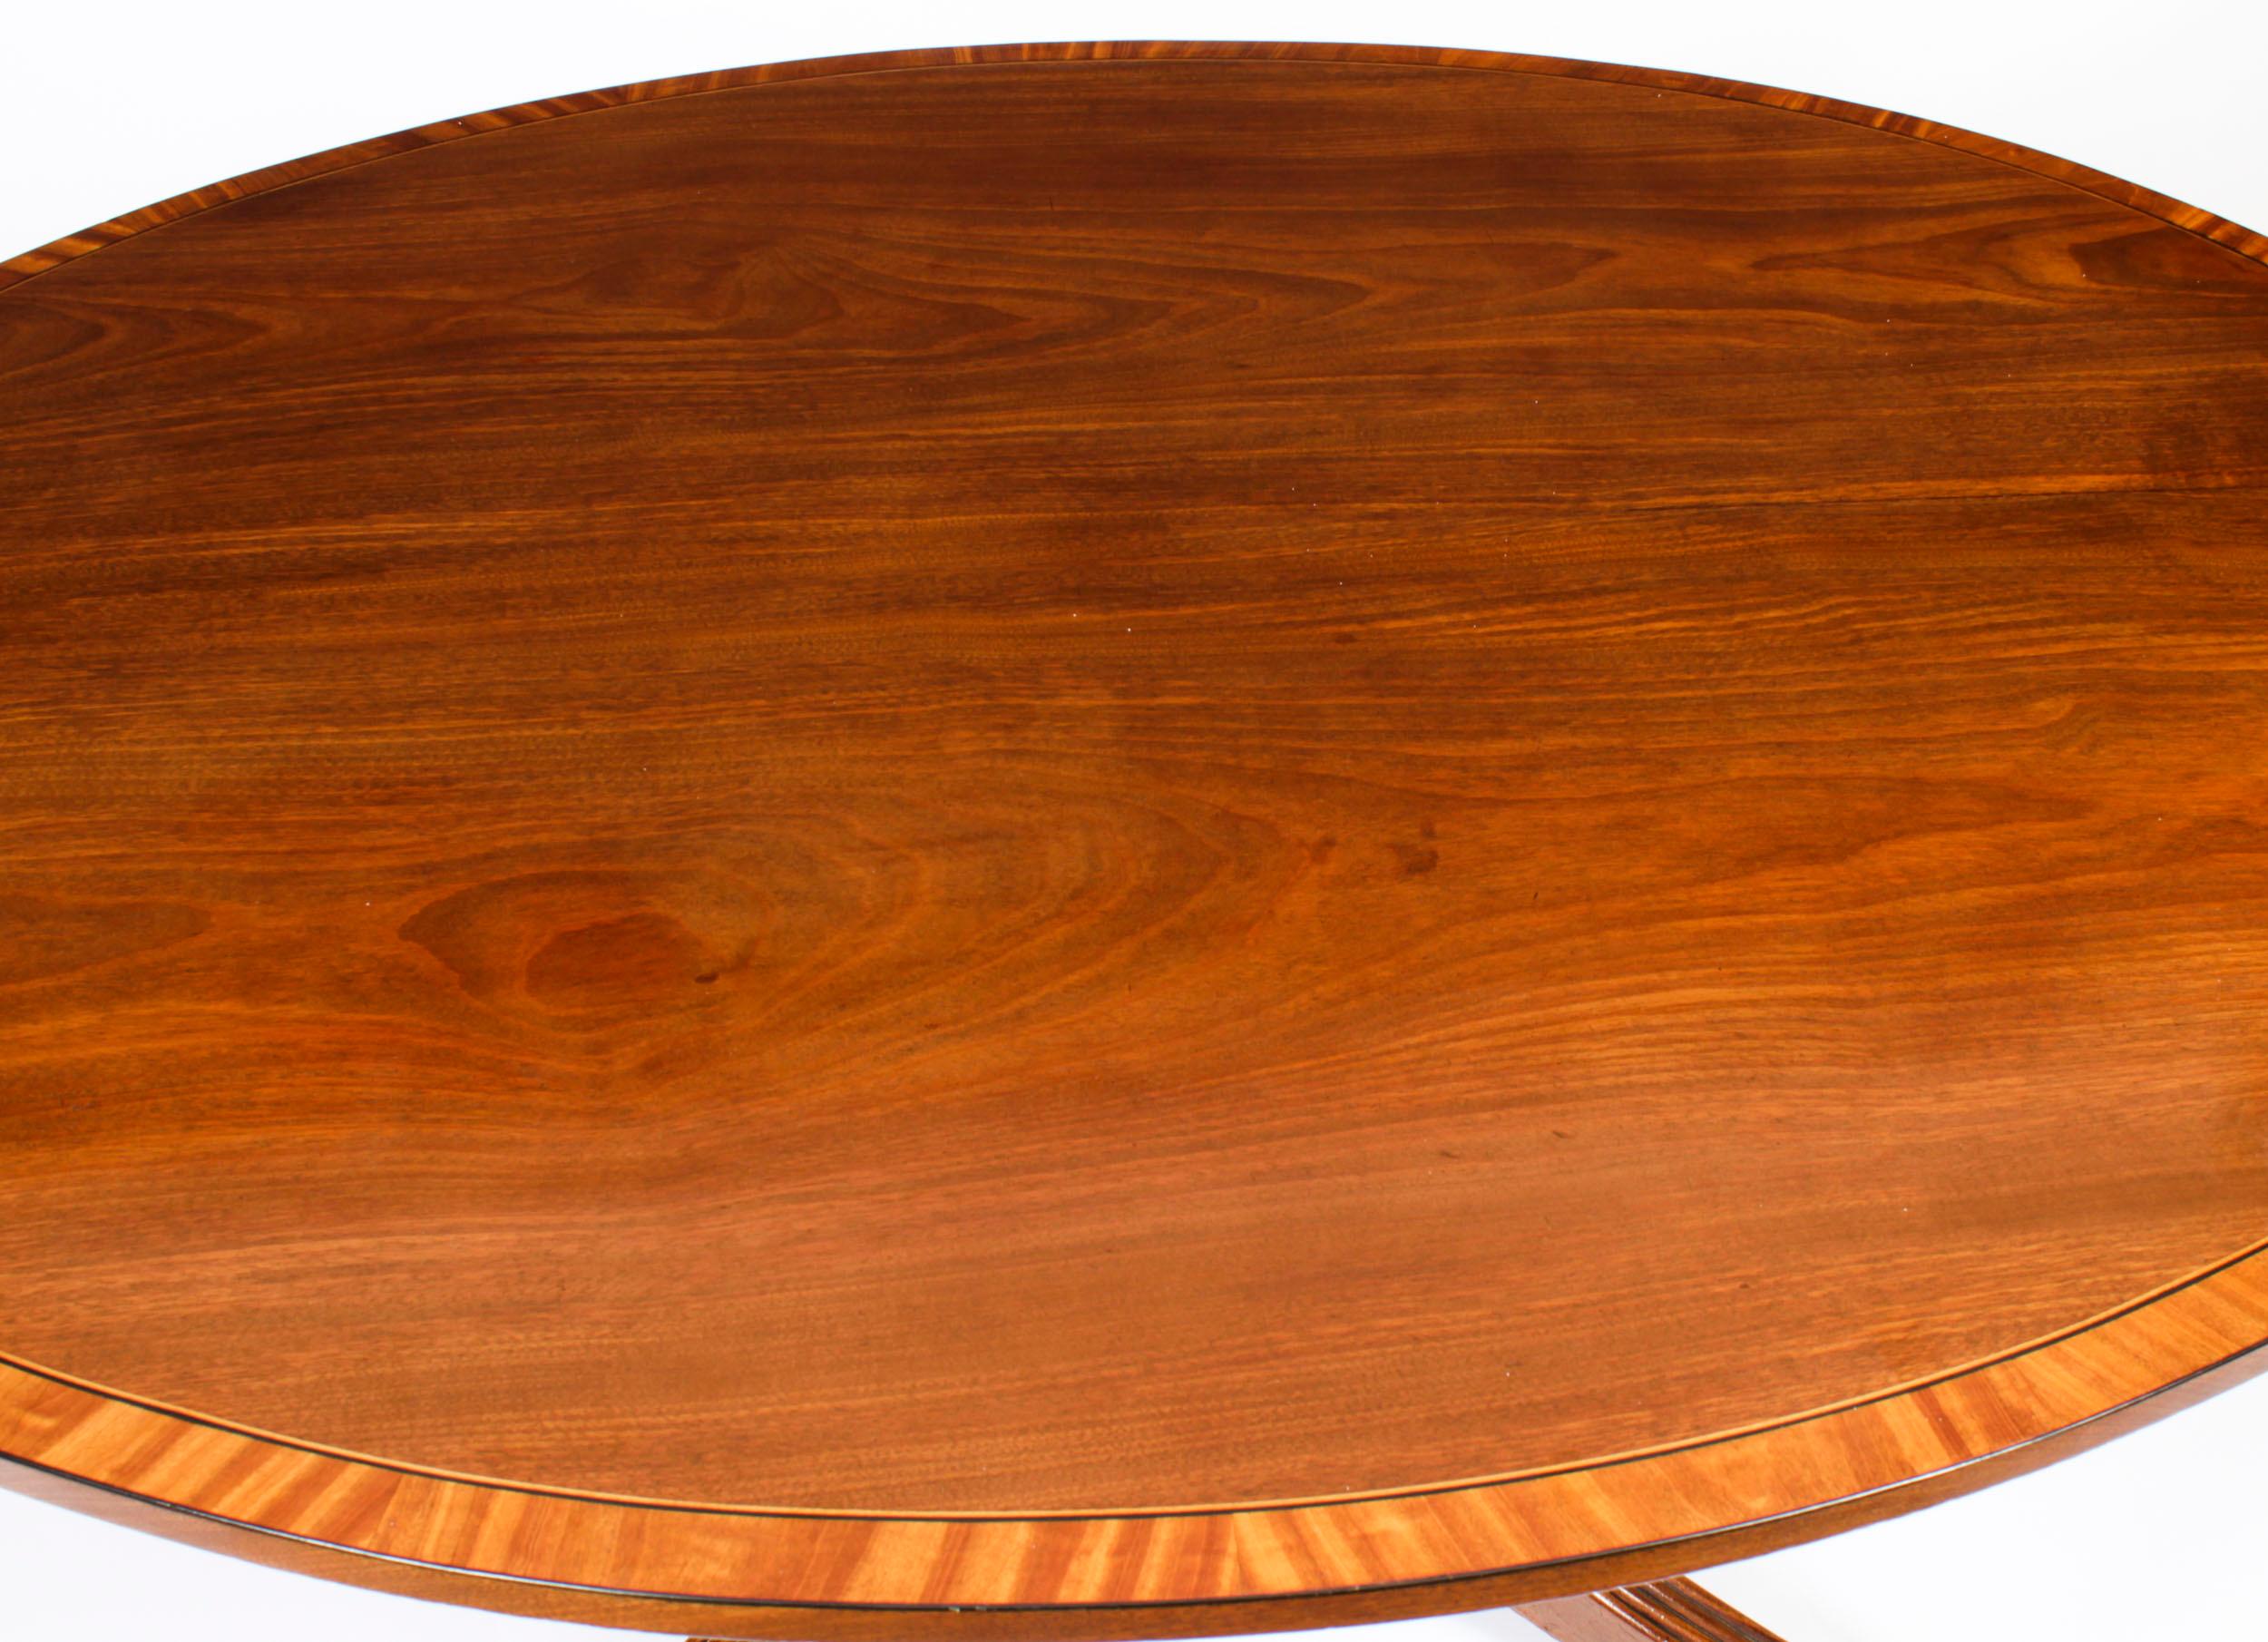 This is a beautiful antique Regency flame mahogany and Satinwood banded tilt top oval dining table dating from Circa 1820. 
 
The fabulous 5ft flame mahogany tilt top table can seat six people in comfort. The top is decoratively crossbanded in